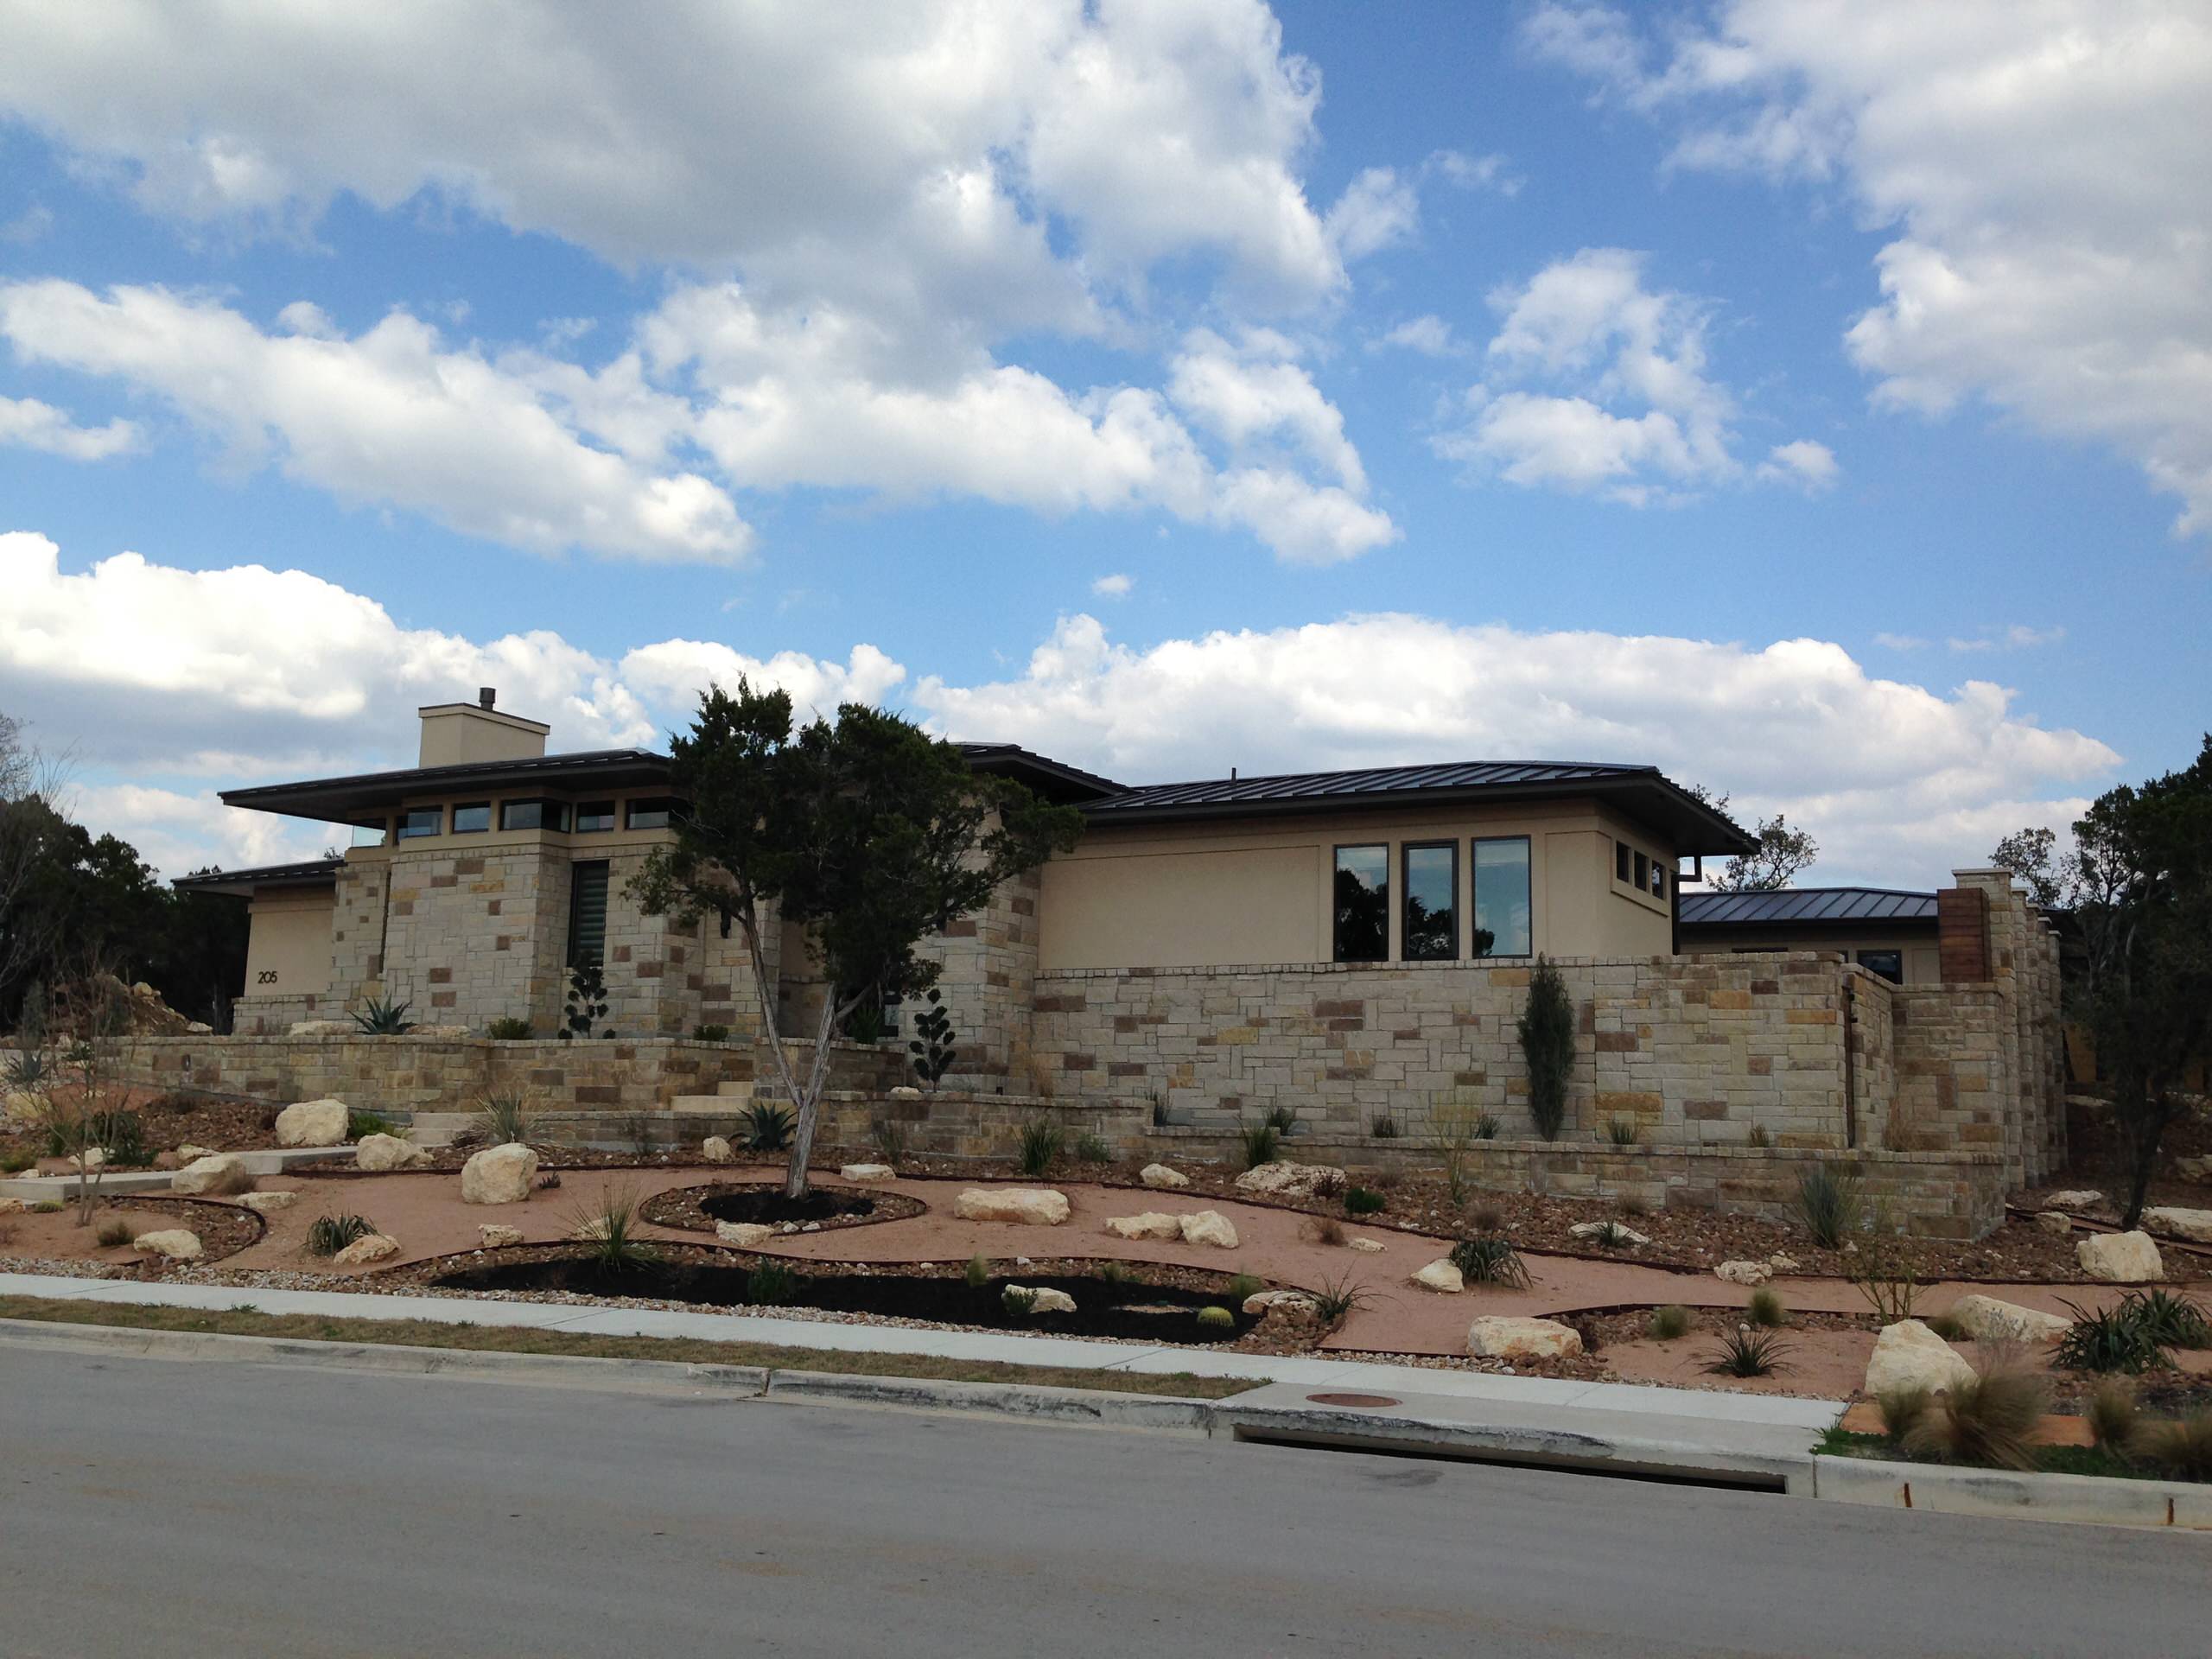 A mix of Hill Country and Prairie architecture